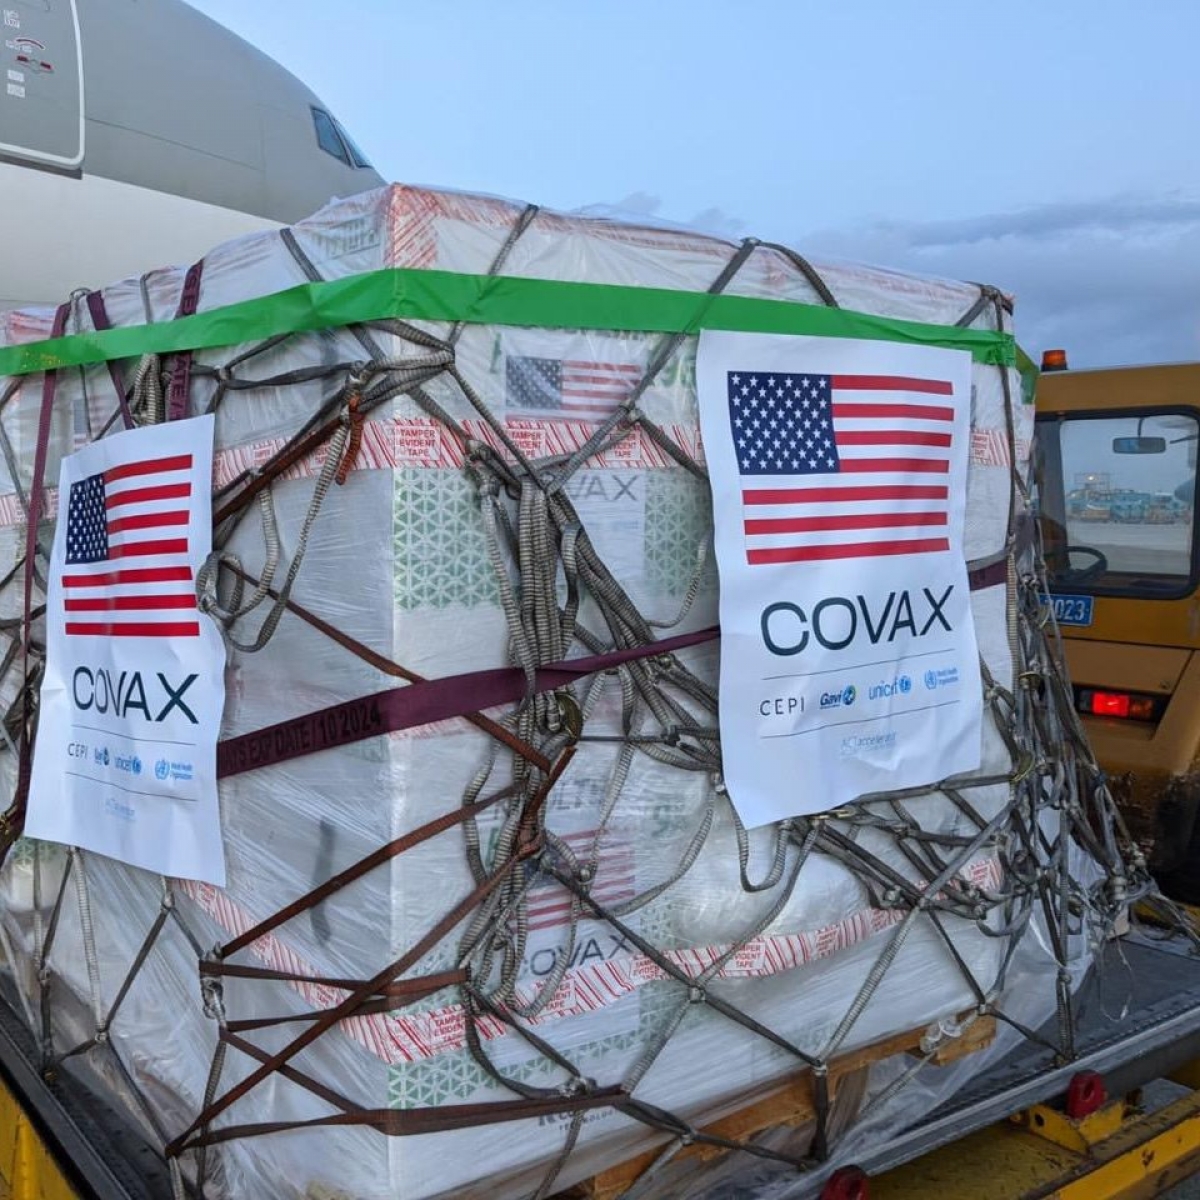 Another batch of the Pfizer vaccine numbering more than 1.3 million doses donated by the US Government has arrived in Vietnam. (Photo: US Embassy).